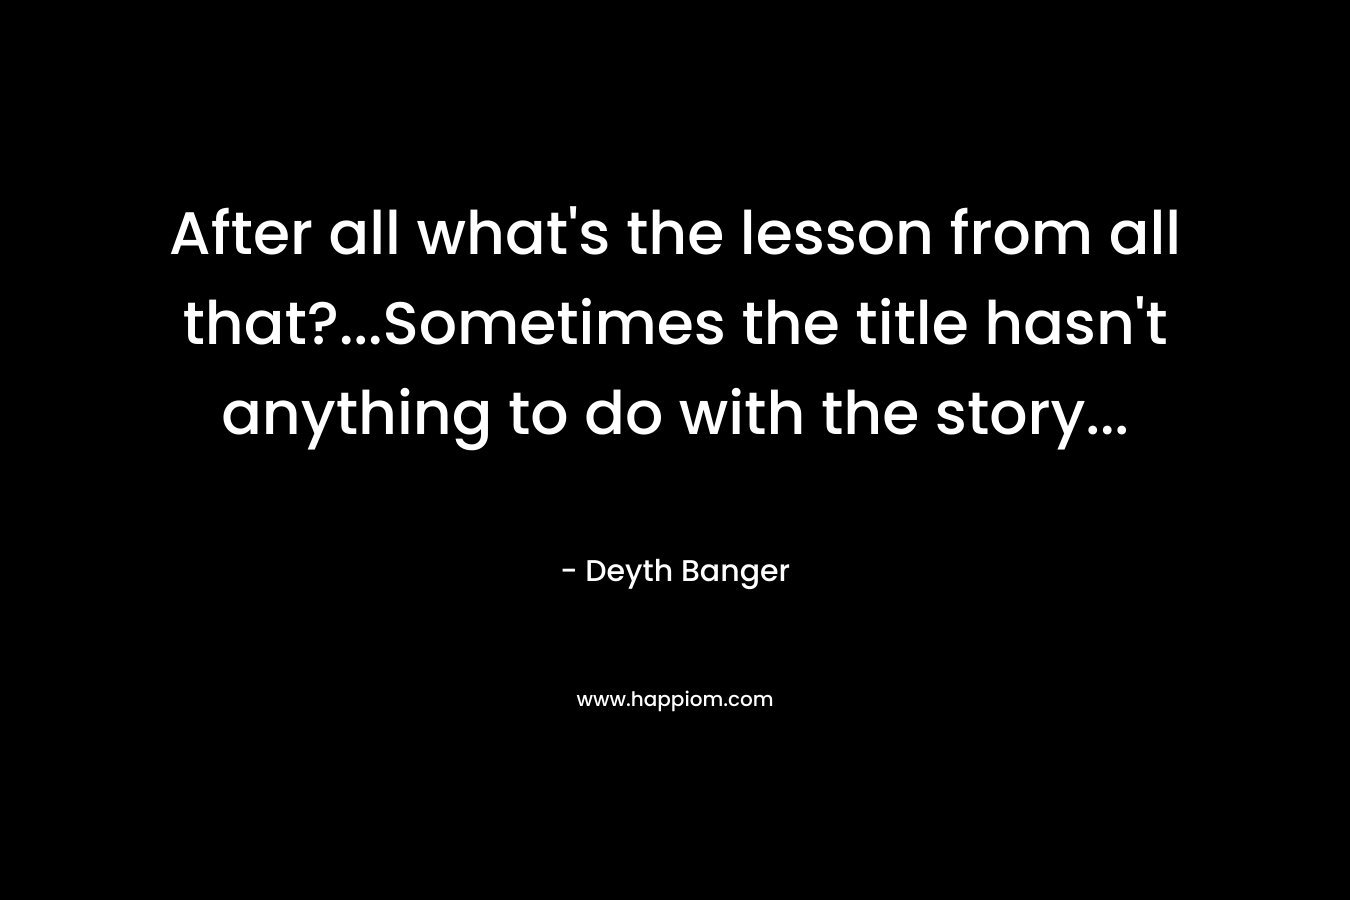 After all what’s the lesson from all that?…Sometimes the title hasn’t anything to do with the story… – Deyth Banger